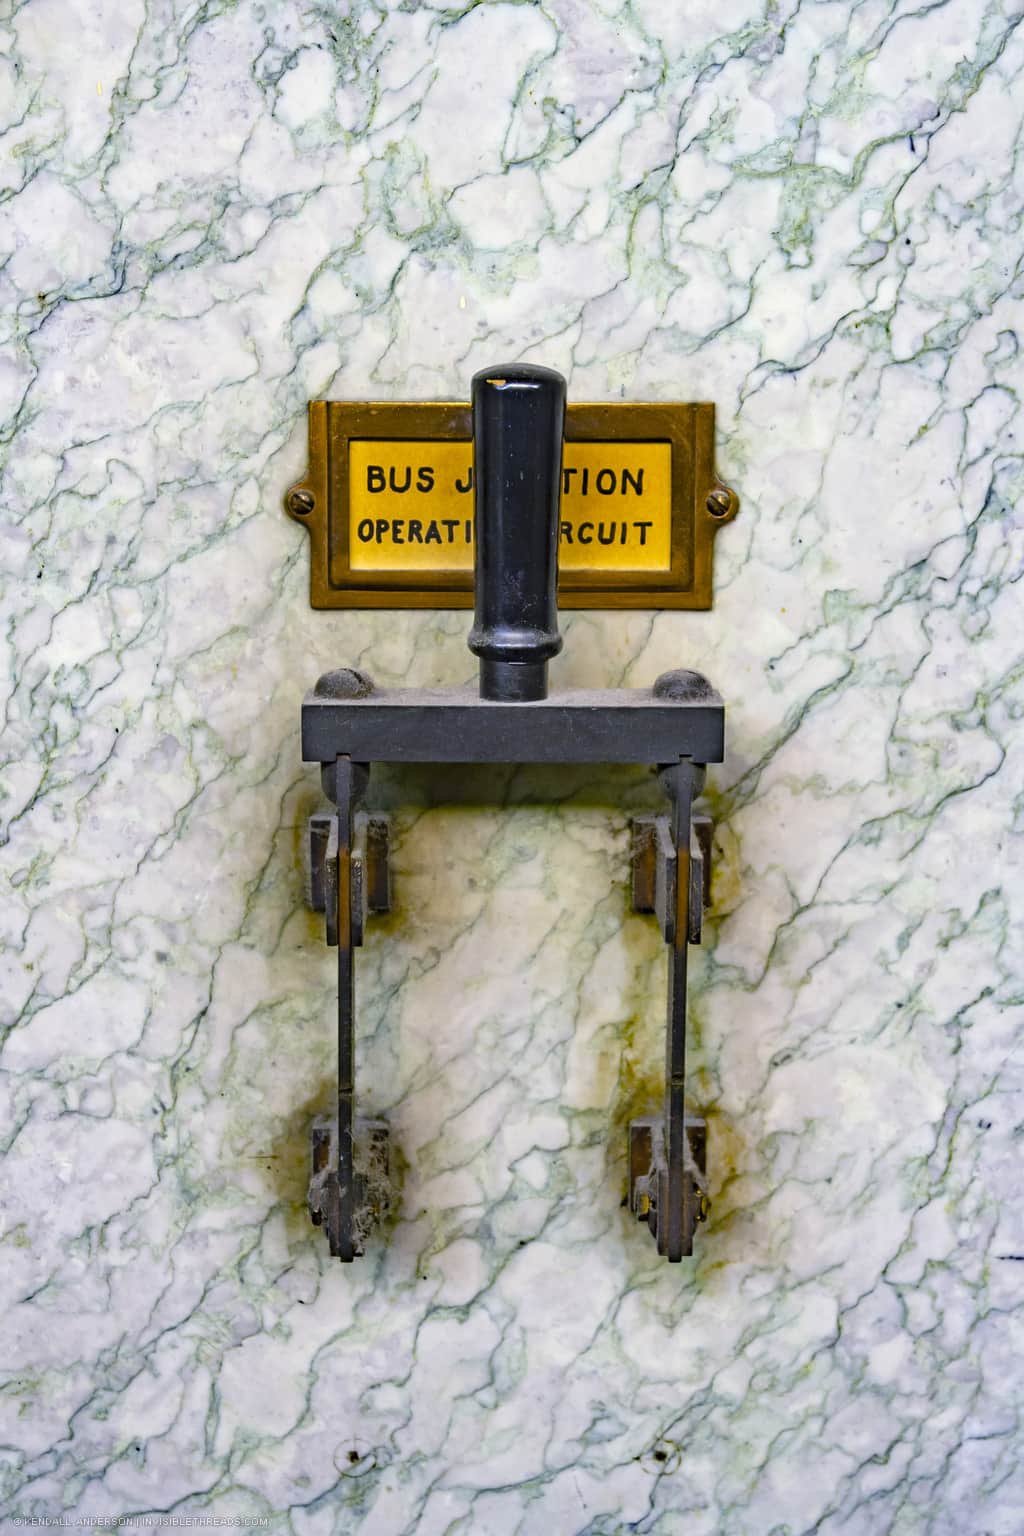 A large lever switch is mounted on a white marble panel. There is a yellow label behind the switch that reads 'Bus Junction Operation Circuit'.